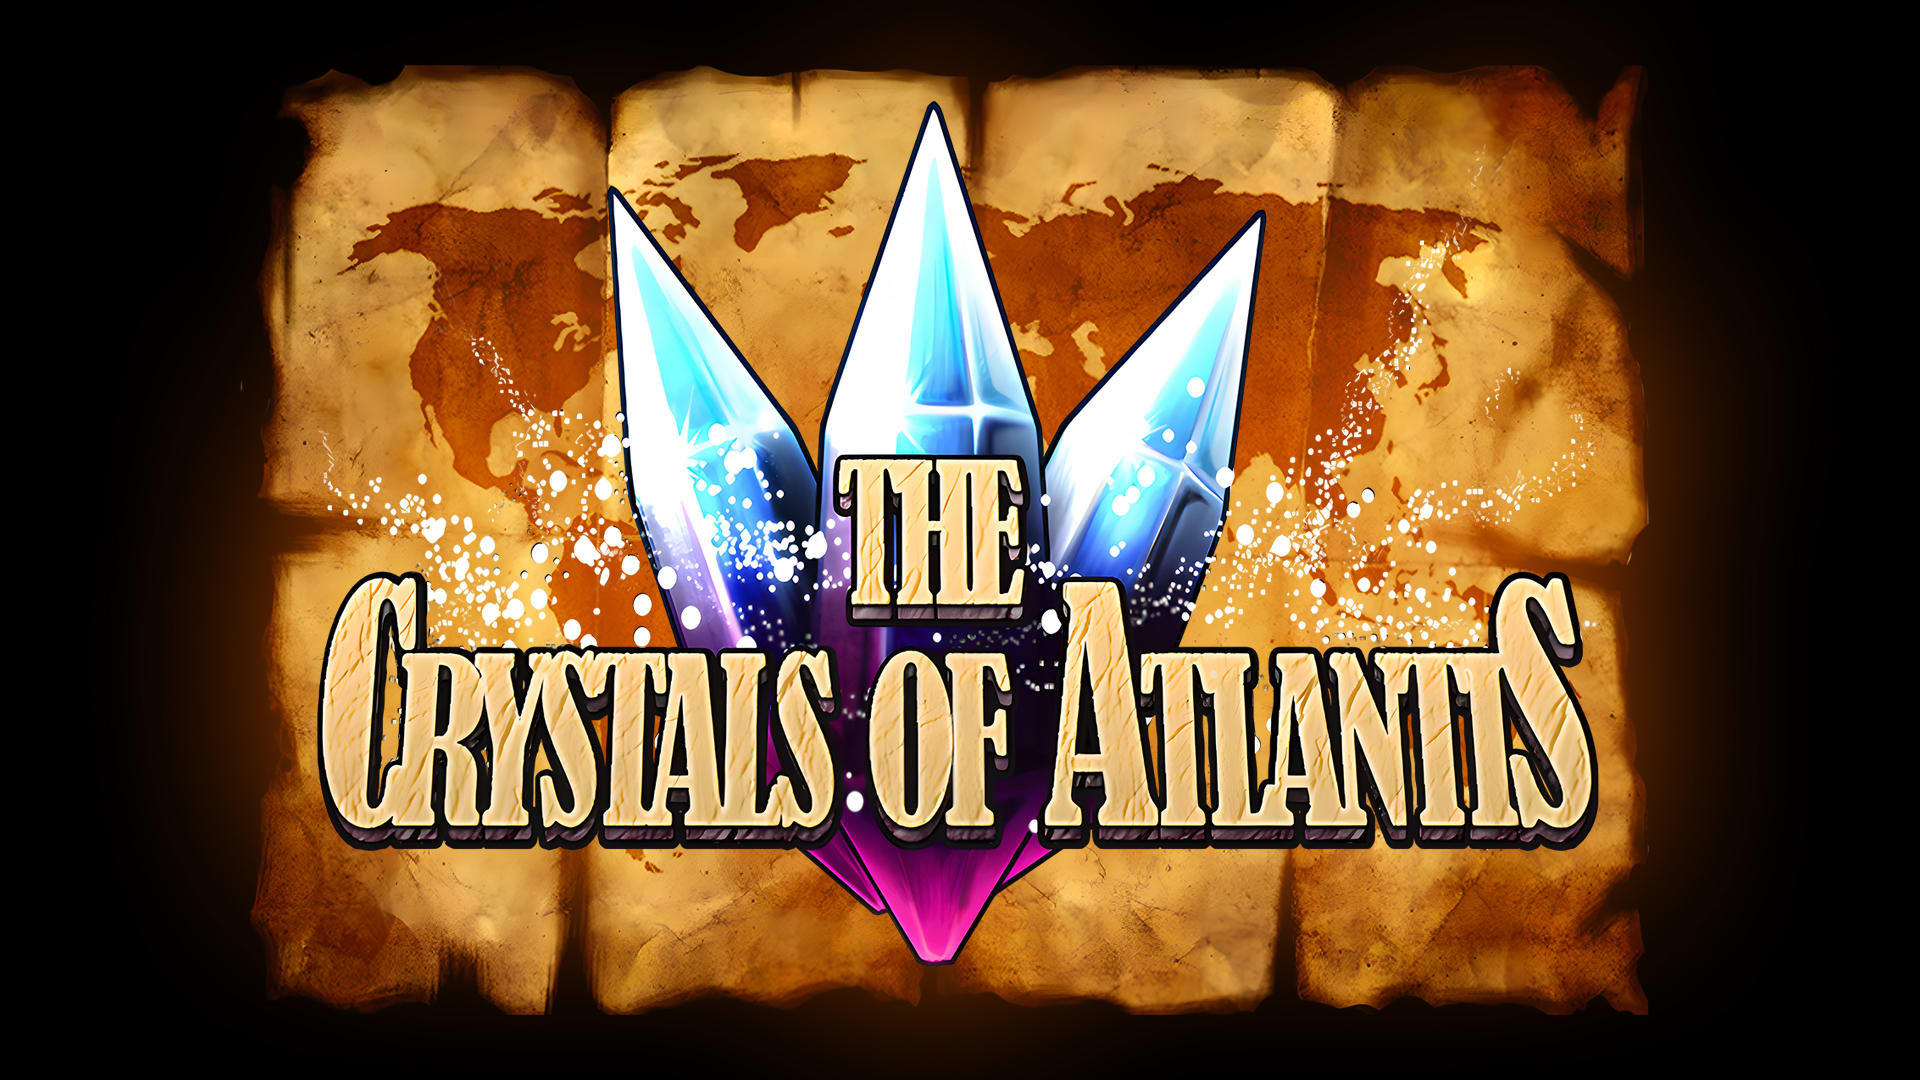 The Crystals of Atlantis